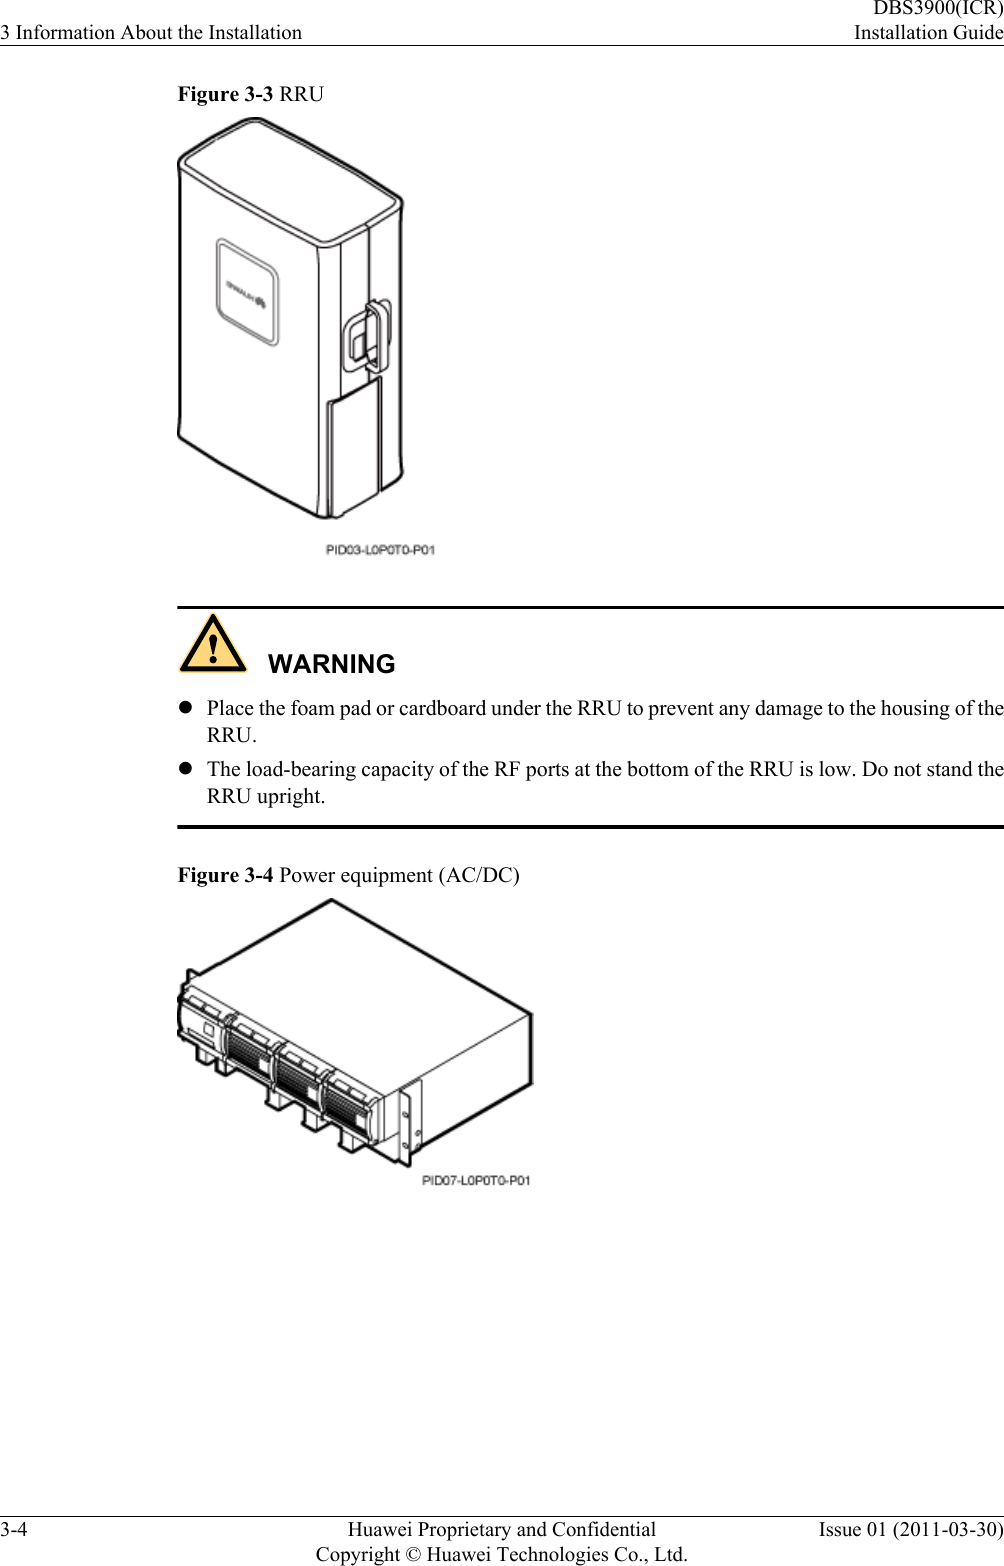 Figure 3-3 RRUWARNINGlPlace the foam pad or cardboard under the RRU to prevent any damage to the housing of theRRU.lThe load-bearing capacity of the RF ports at the bottom of the RRU is low. Do not stand theRRU upright.Figure 3-4 Power equipment (AC/DC)3 Information About the InstallationDBS3900(ICR)Installation Guide3-4 Huawei Proprietary and ConfidentialCopyright © Huawei Technologies Co., Ltd.Issue 01 (2011-03-30)